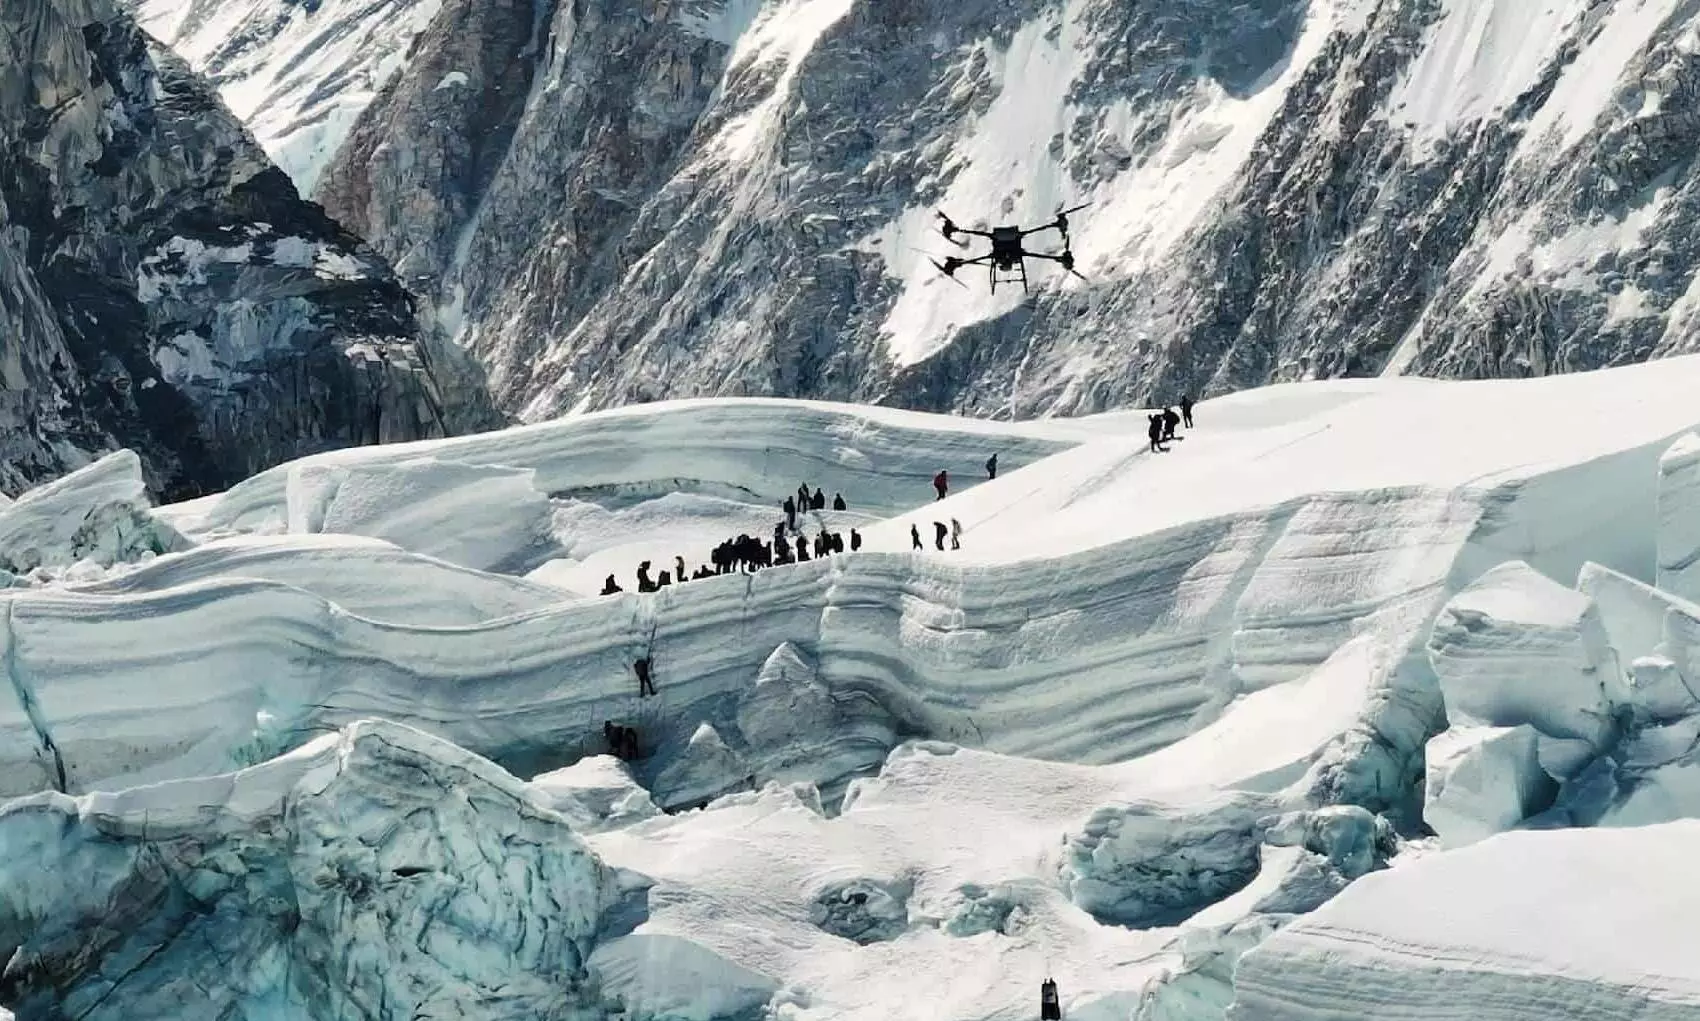 DJI drone could make historic supply on Mount Everest